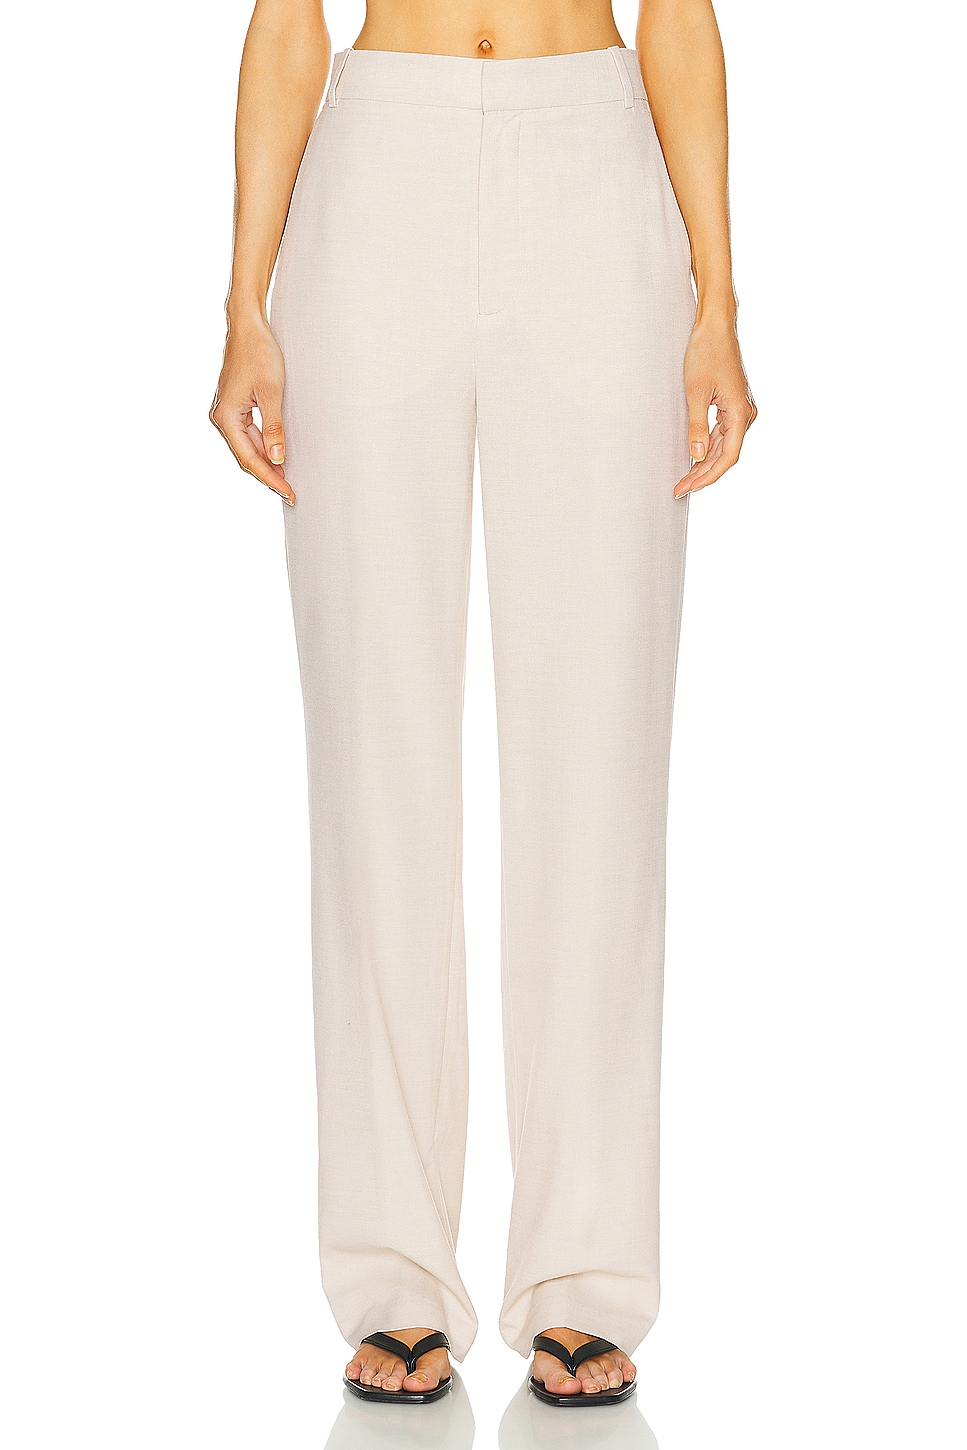 by Marianna Hendry Trouser in Beige